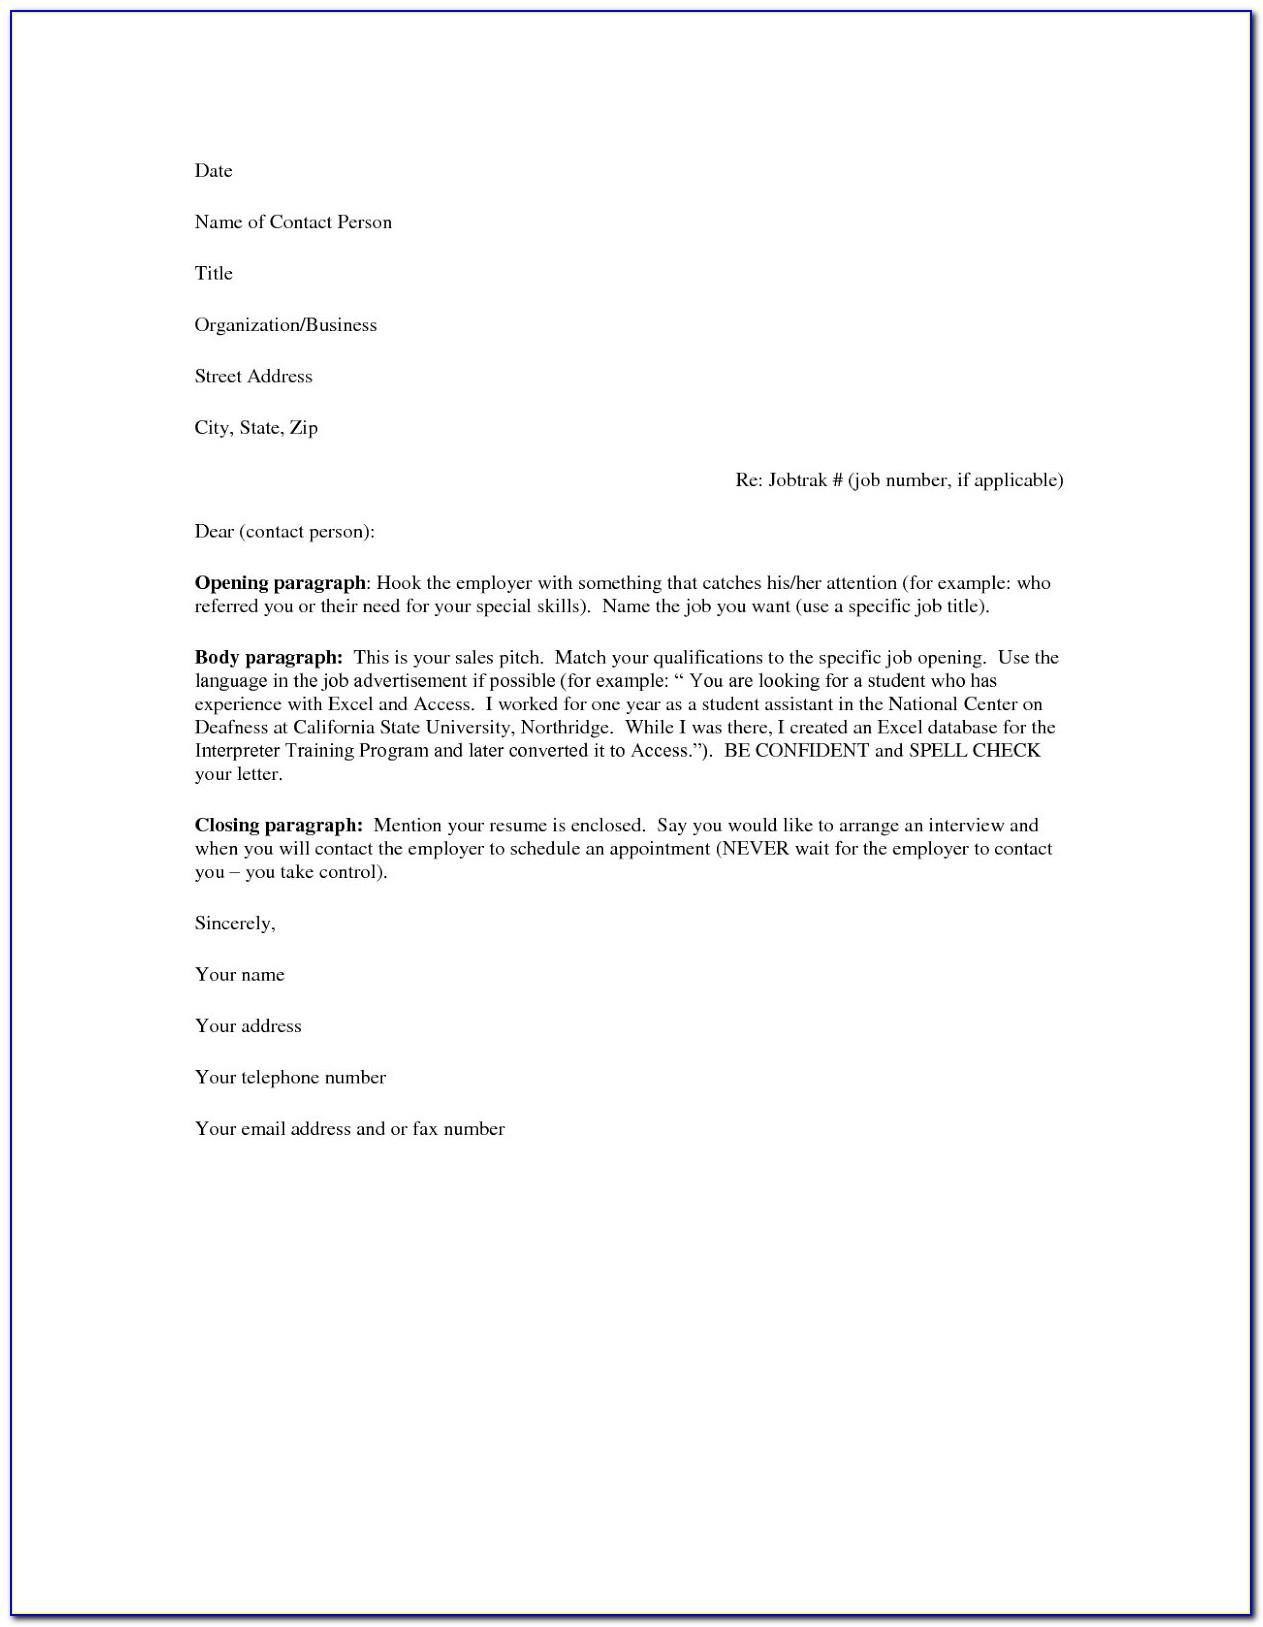 Resume Cover Letter Templates Free